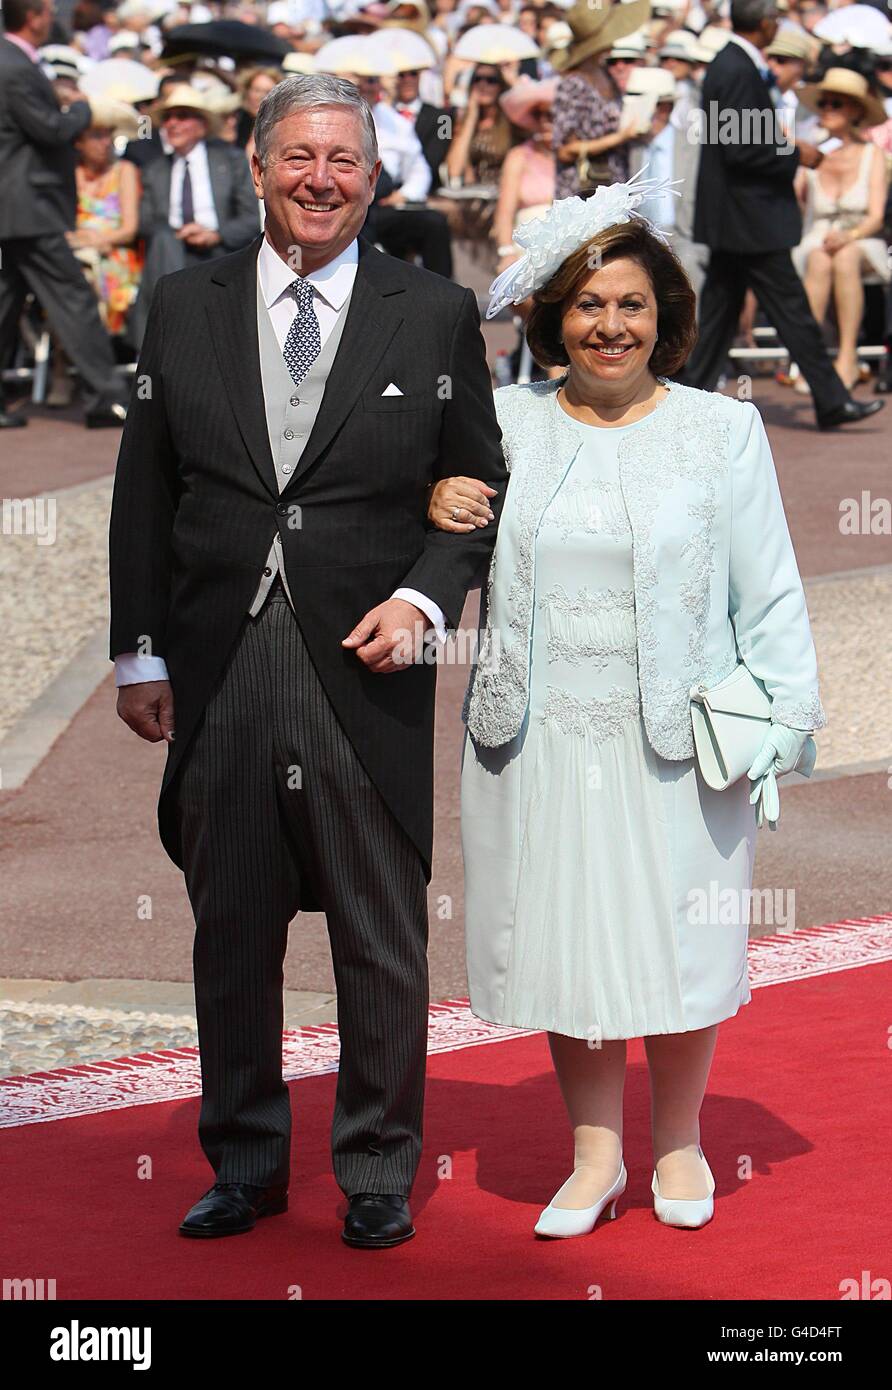 Crown Princess Katherine of Serbia and Crown Prince Alexander II of Serbia arriving for the wedding of Prince Albert II of Monaco and Charlene Wittstock at the Place du Palais. Stock Photo